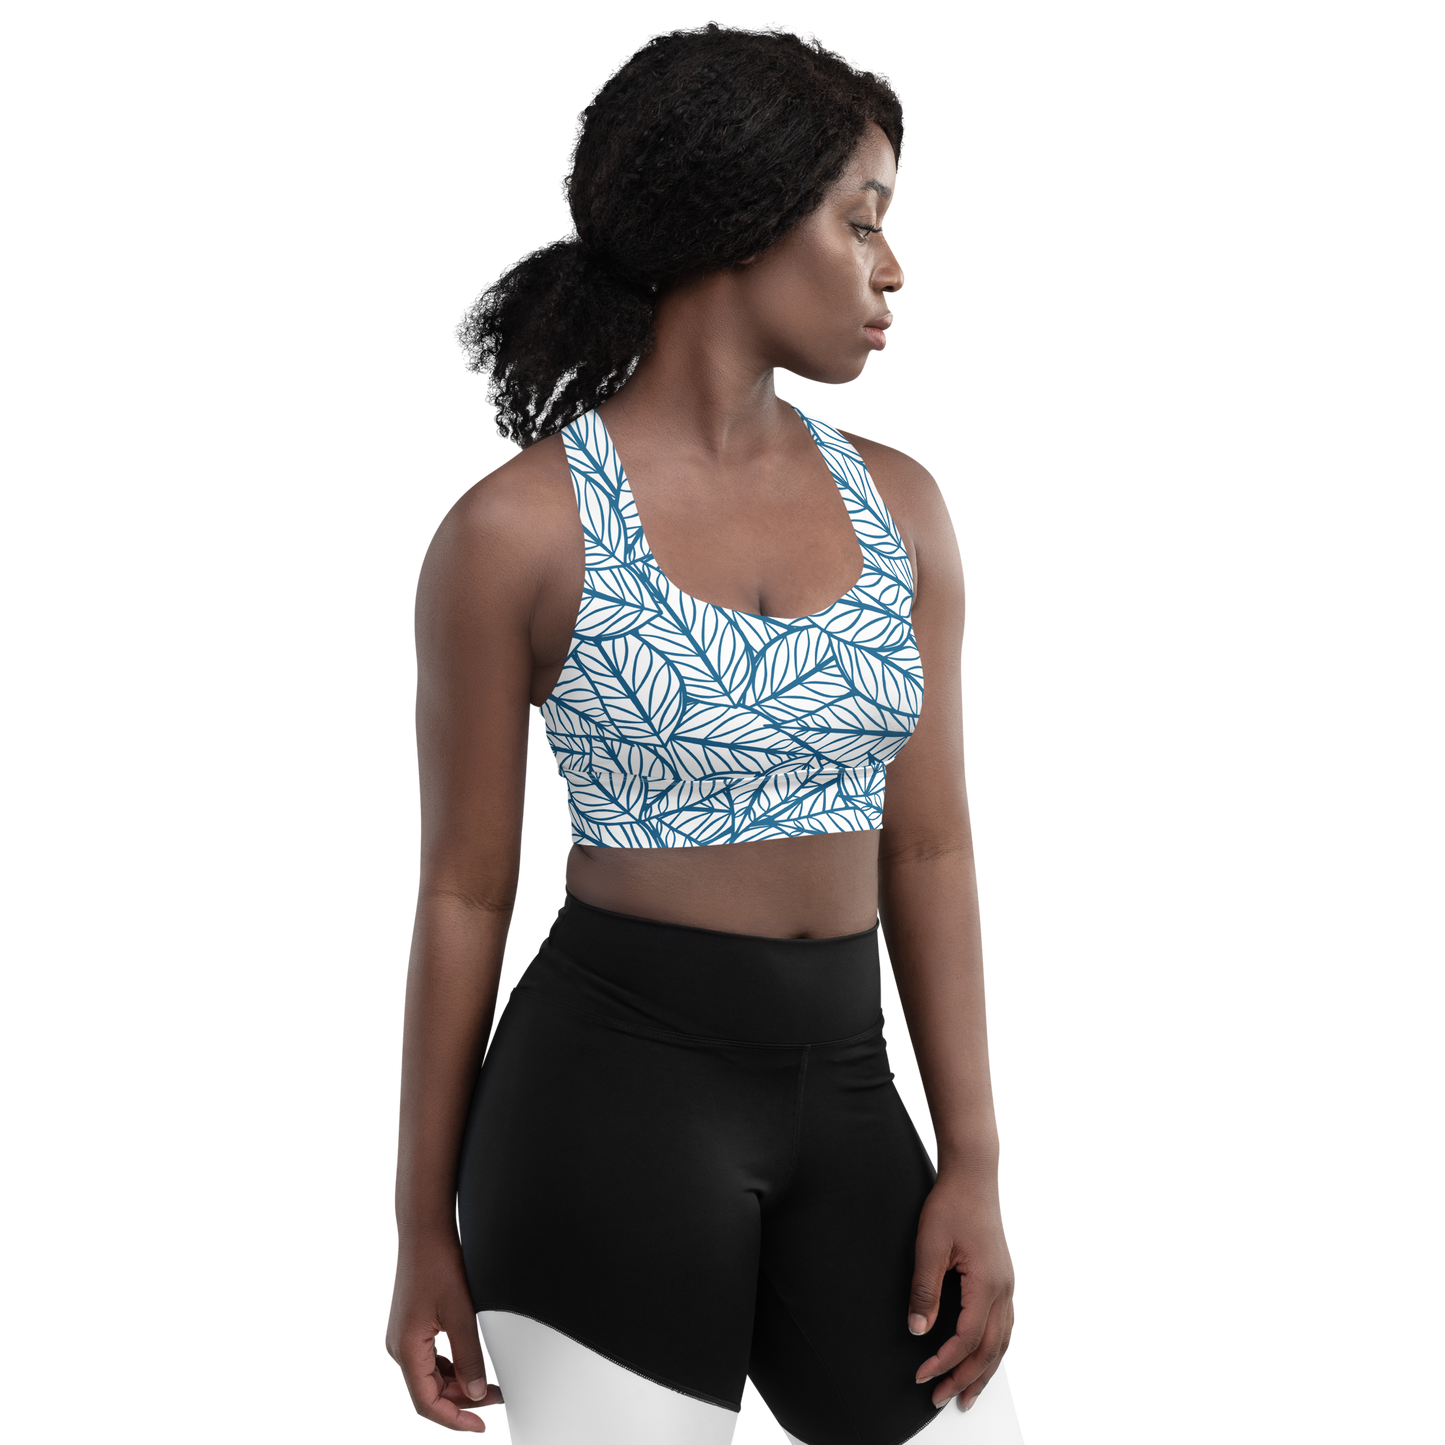 Colorful Fall Leaves | Seamless Patterns | All-Over Print Longline Sports Bra - #10